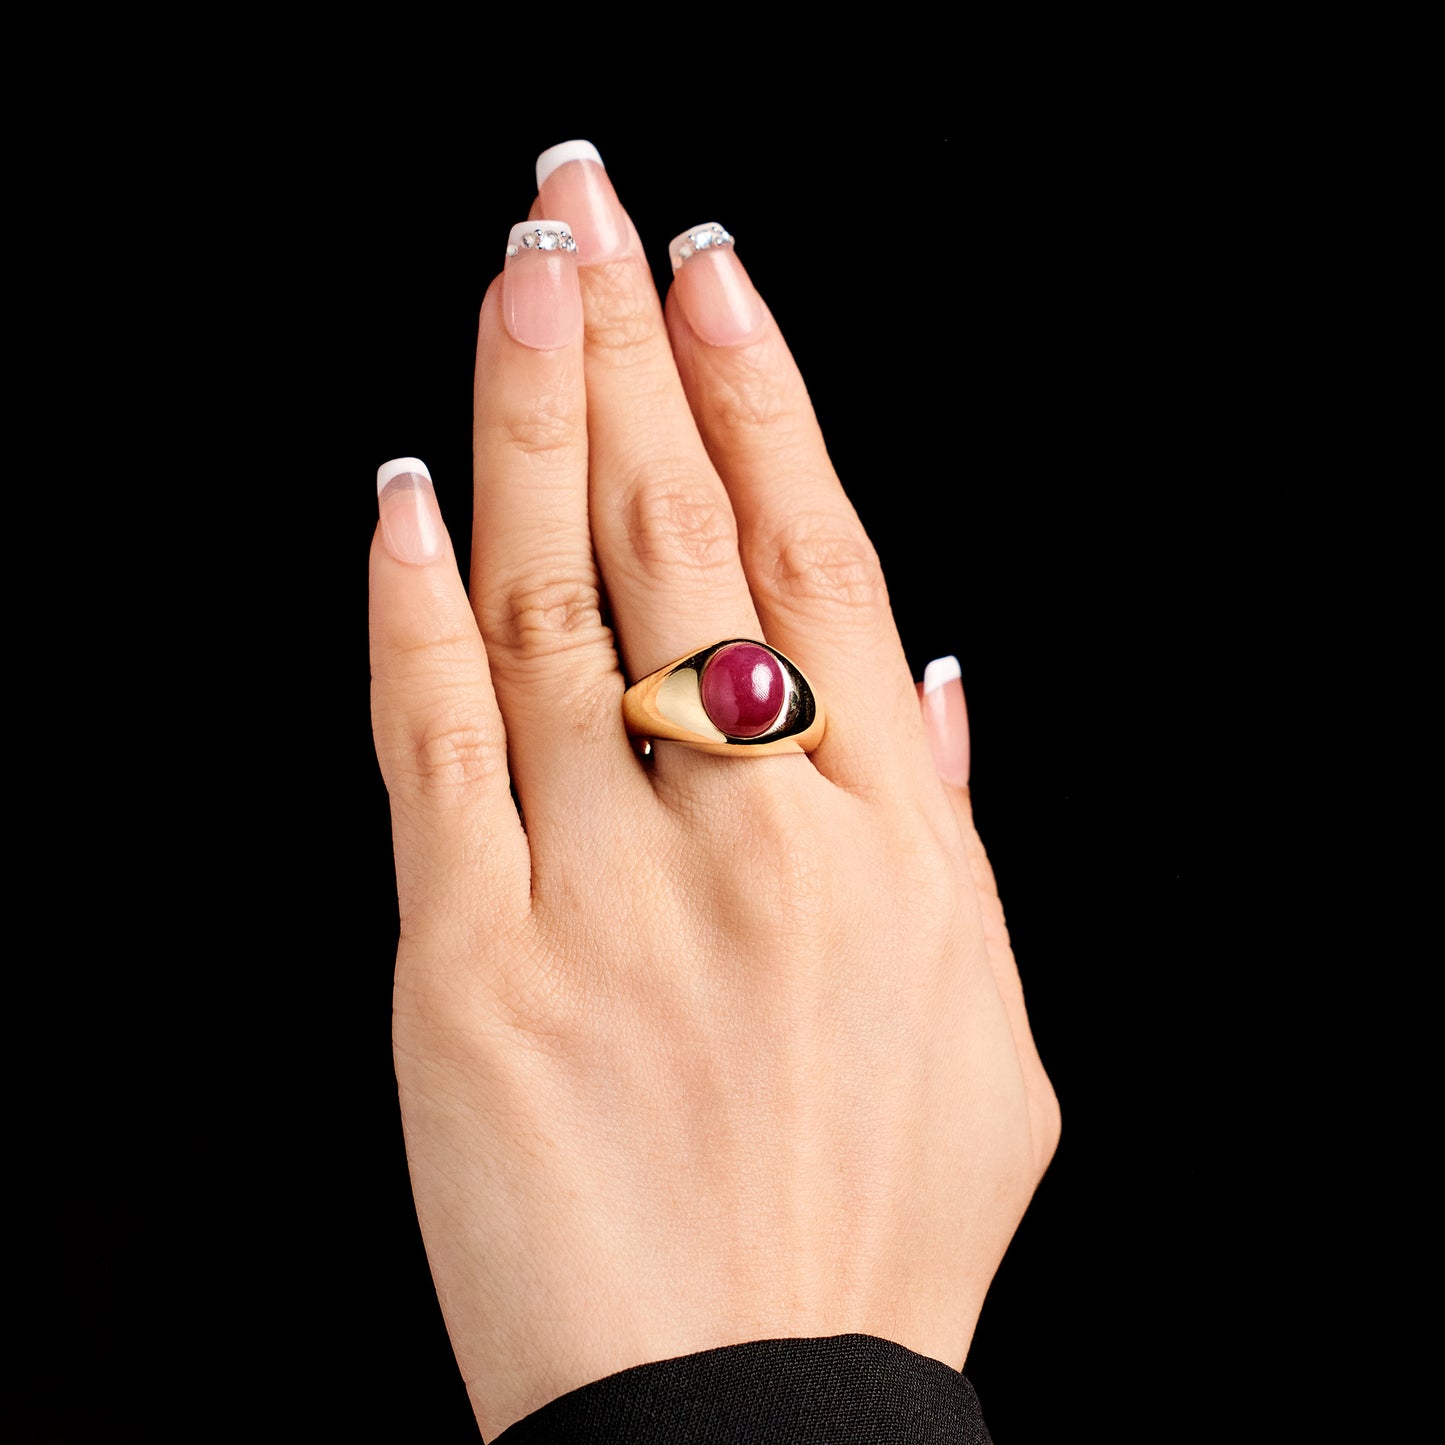 Spauling & Co. Ruby Ring